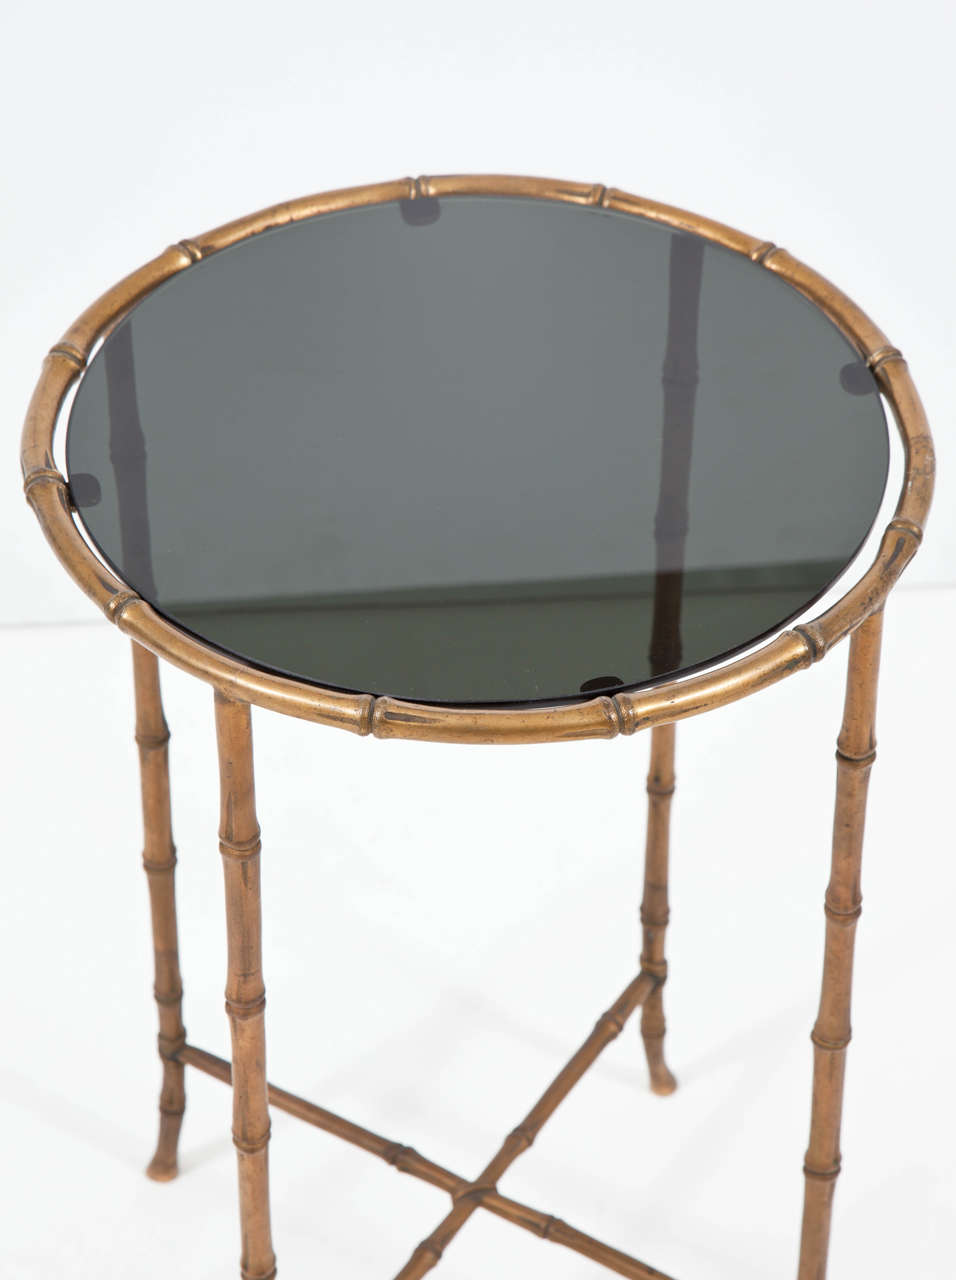 Bronze faux bamboo side table having inset black glass top